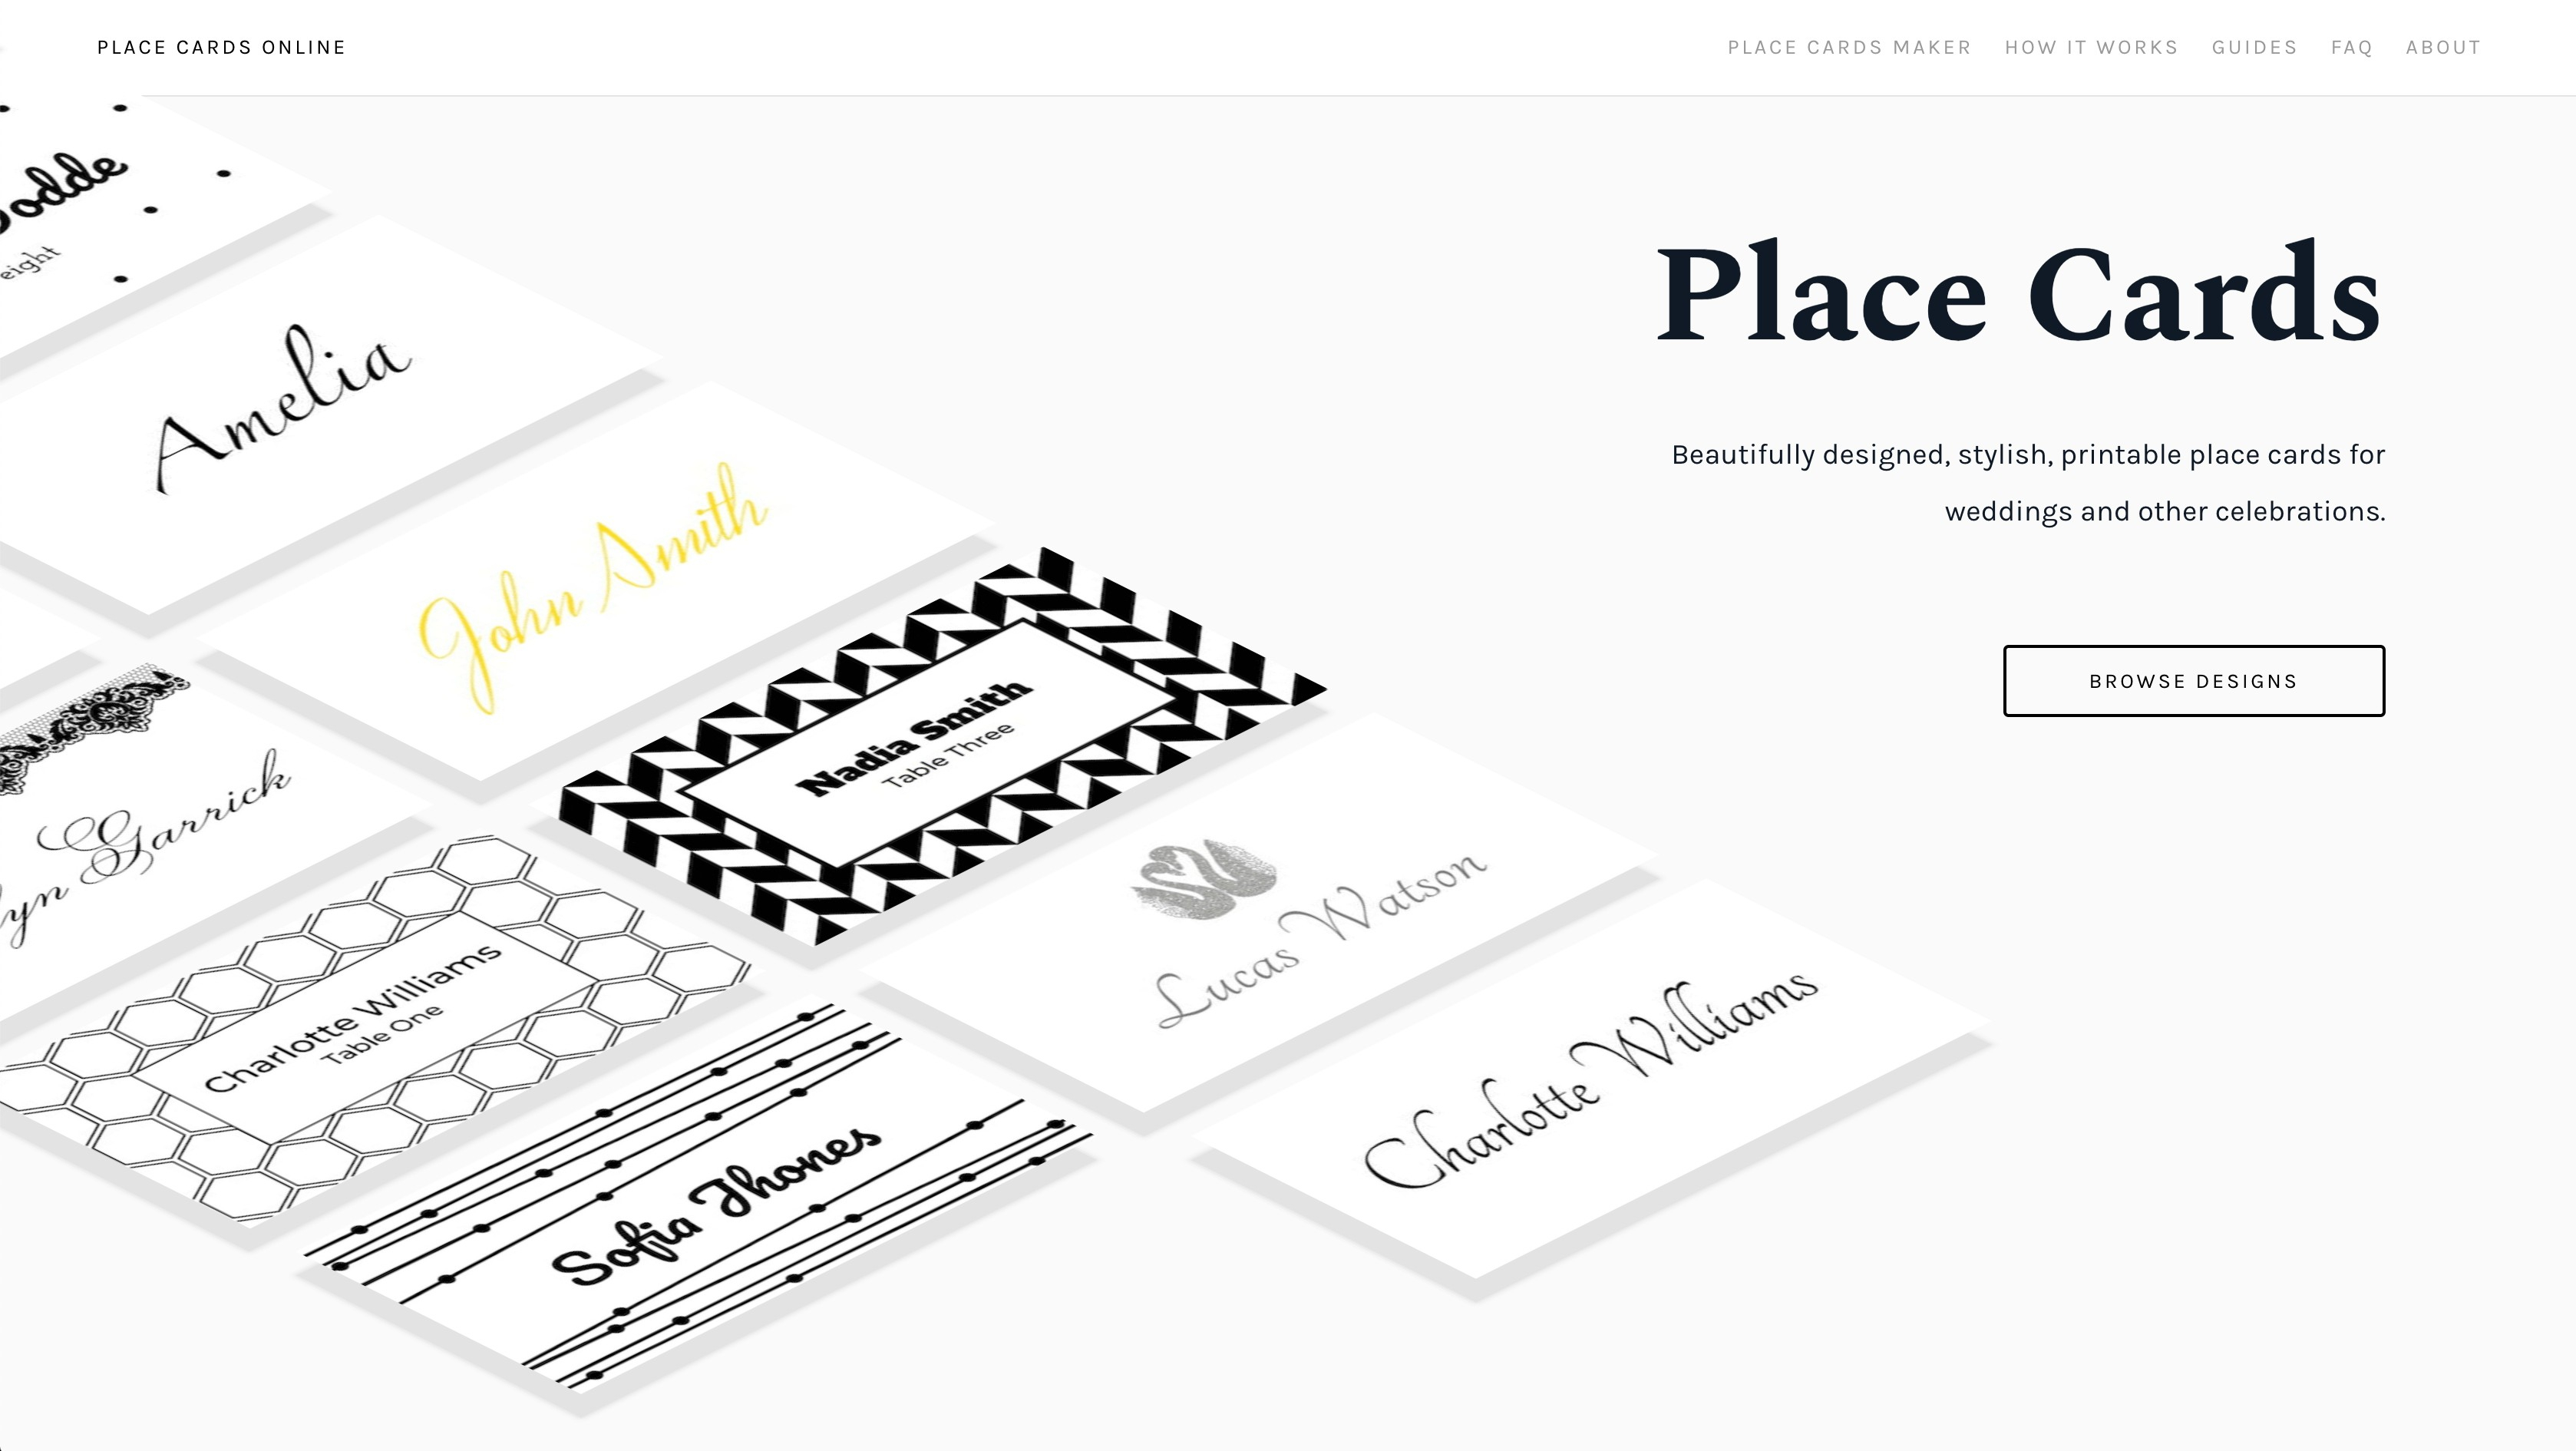 Place Cards Online - Place Cards Maker. Beautifully Designed Inside Celebrate It Templates Place Cards